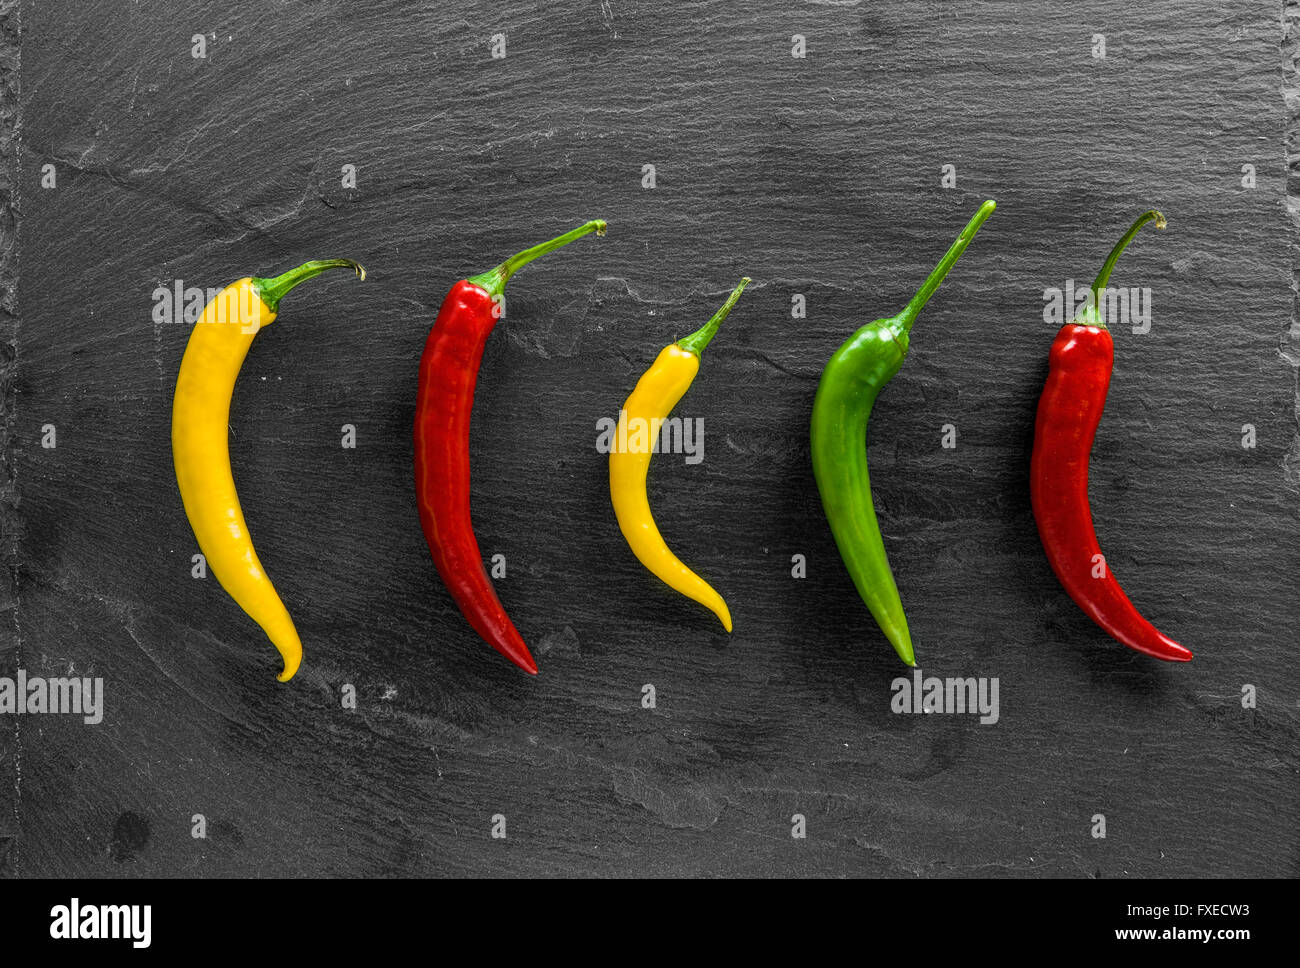 Hot chili peppers on slate plate. Stock Photo